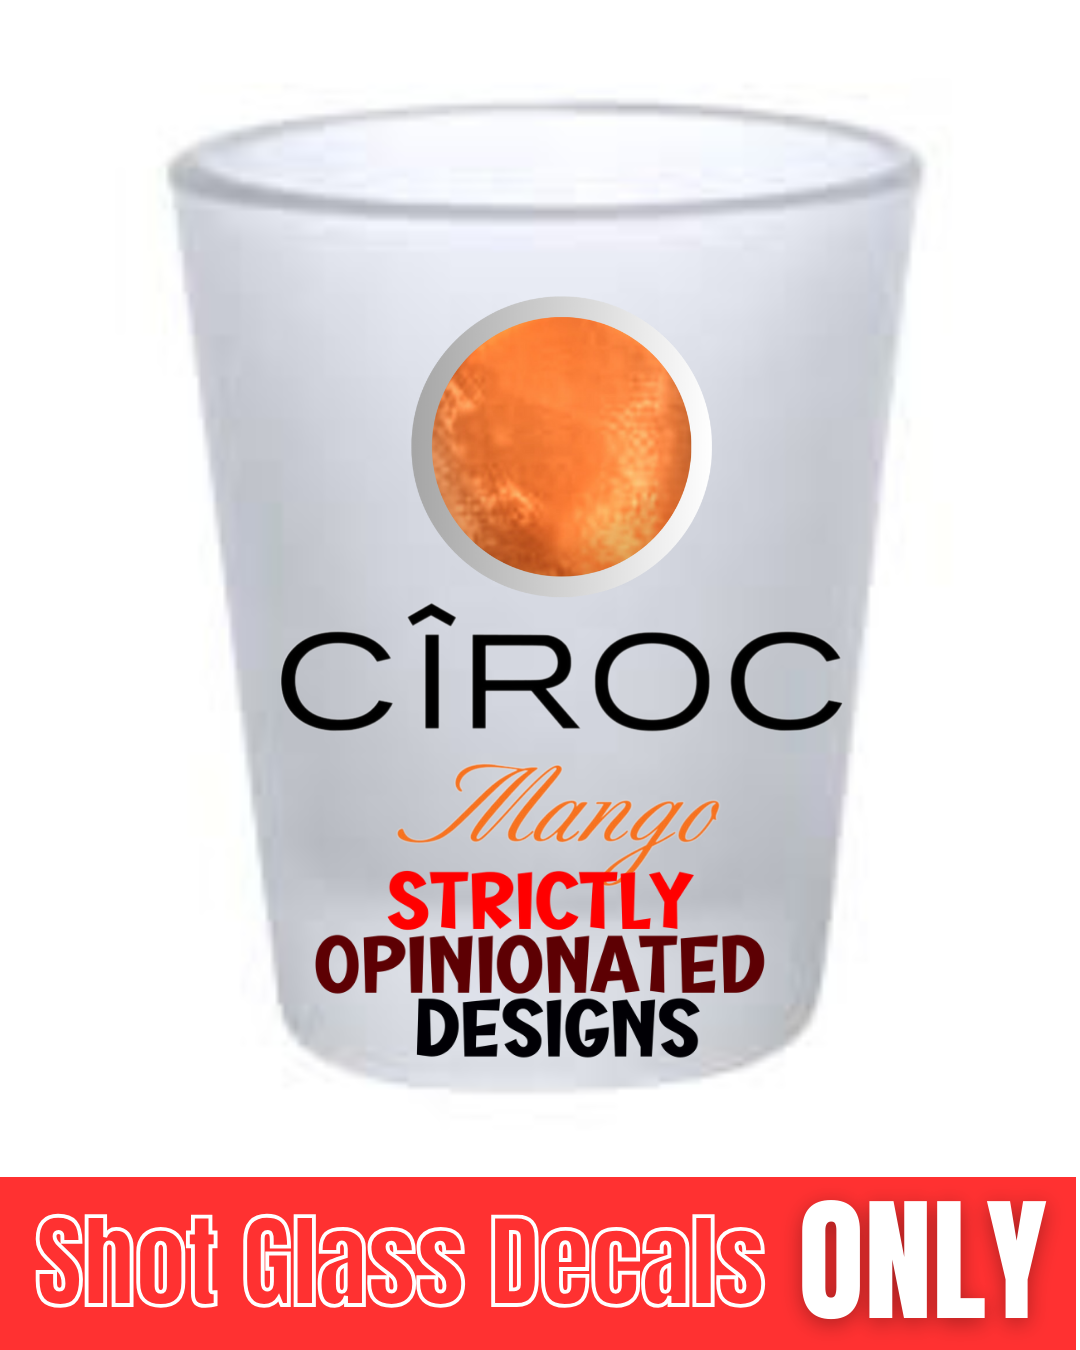 Ciroc Shot Glass Single Decal Only